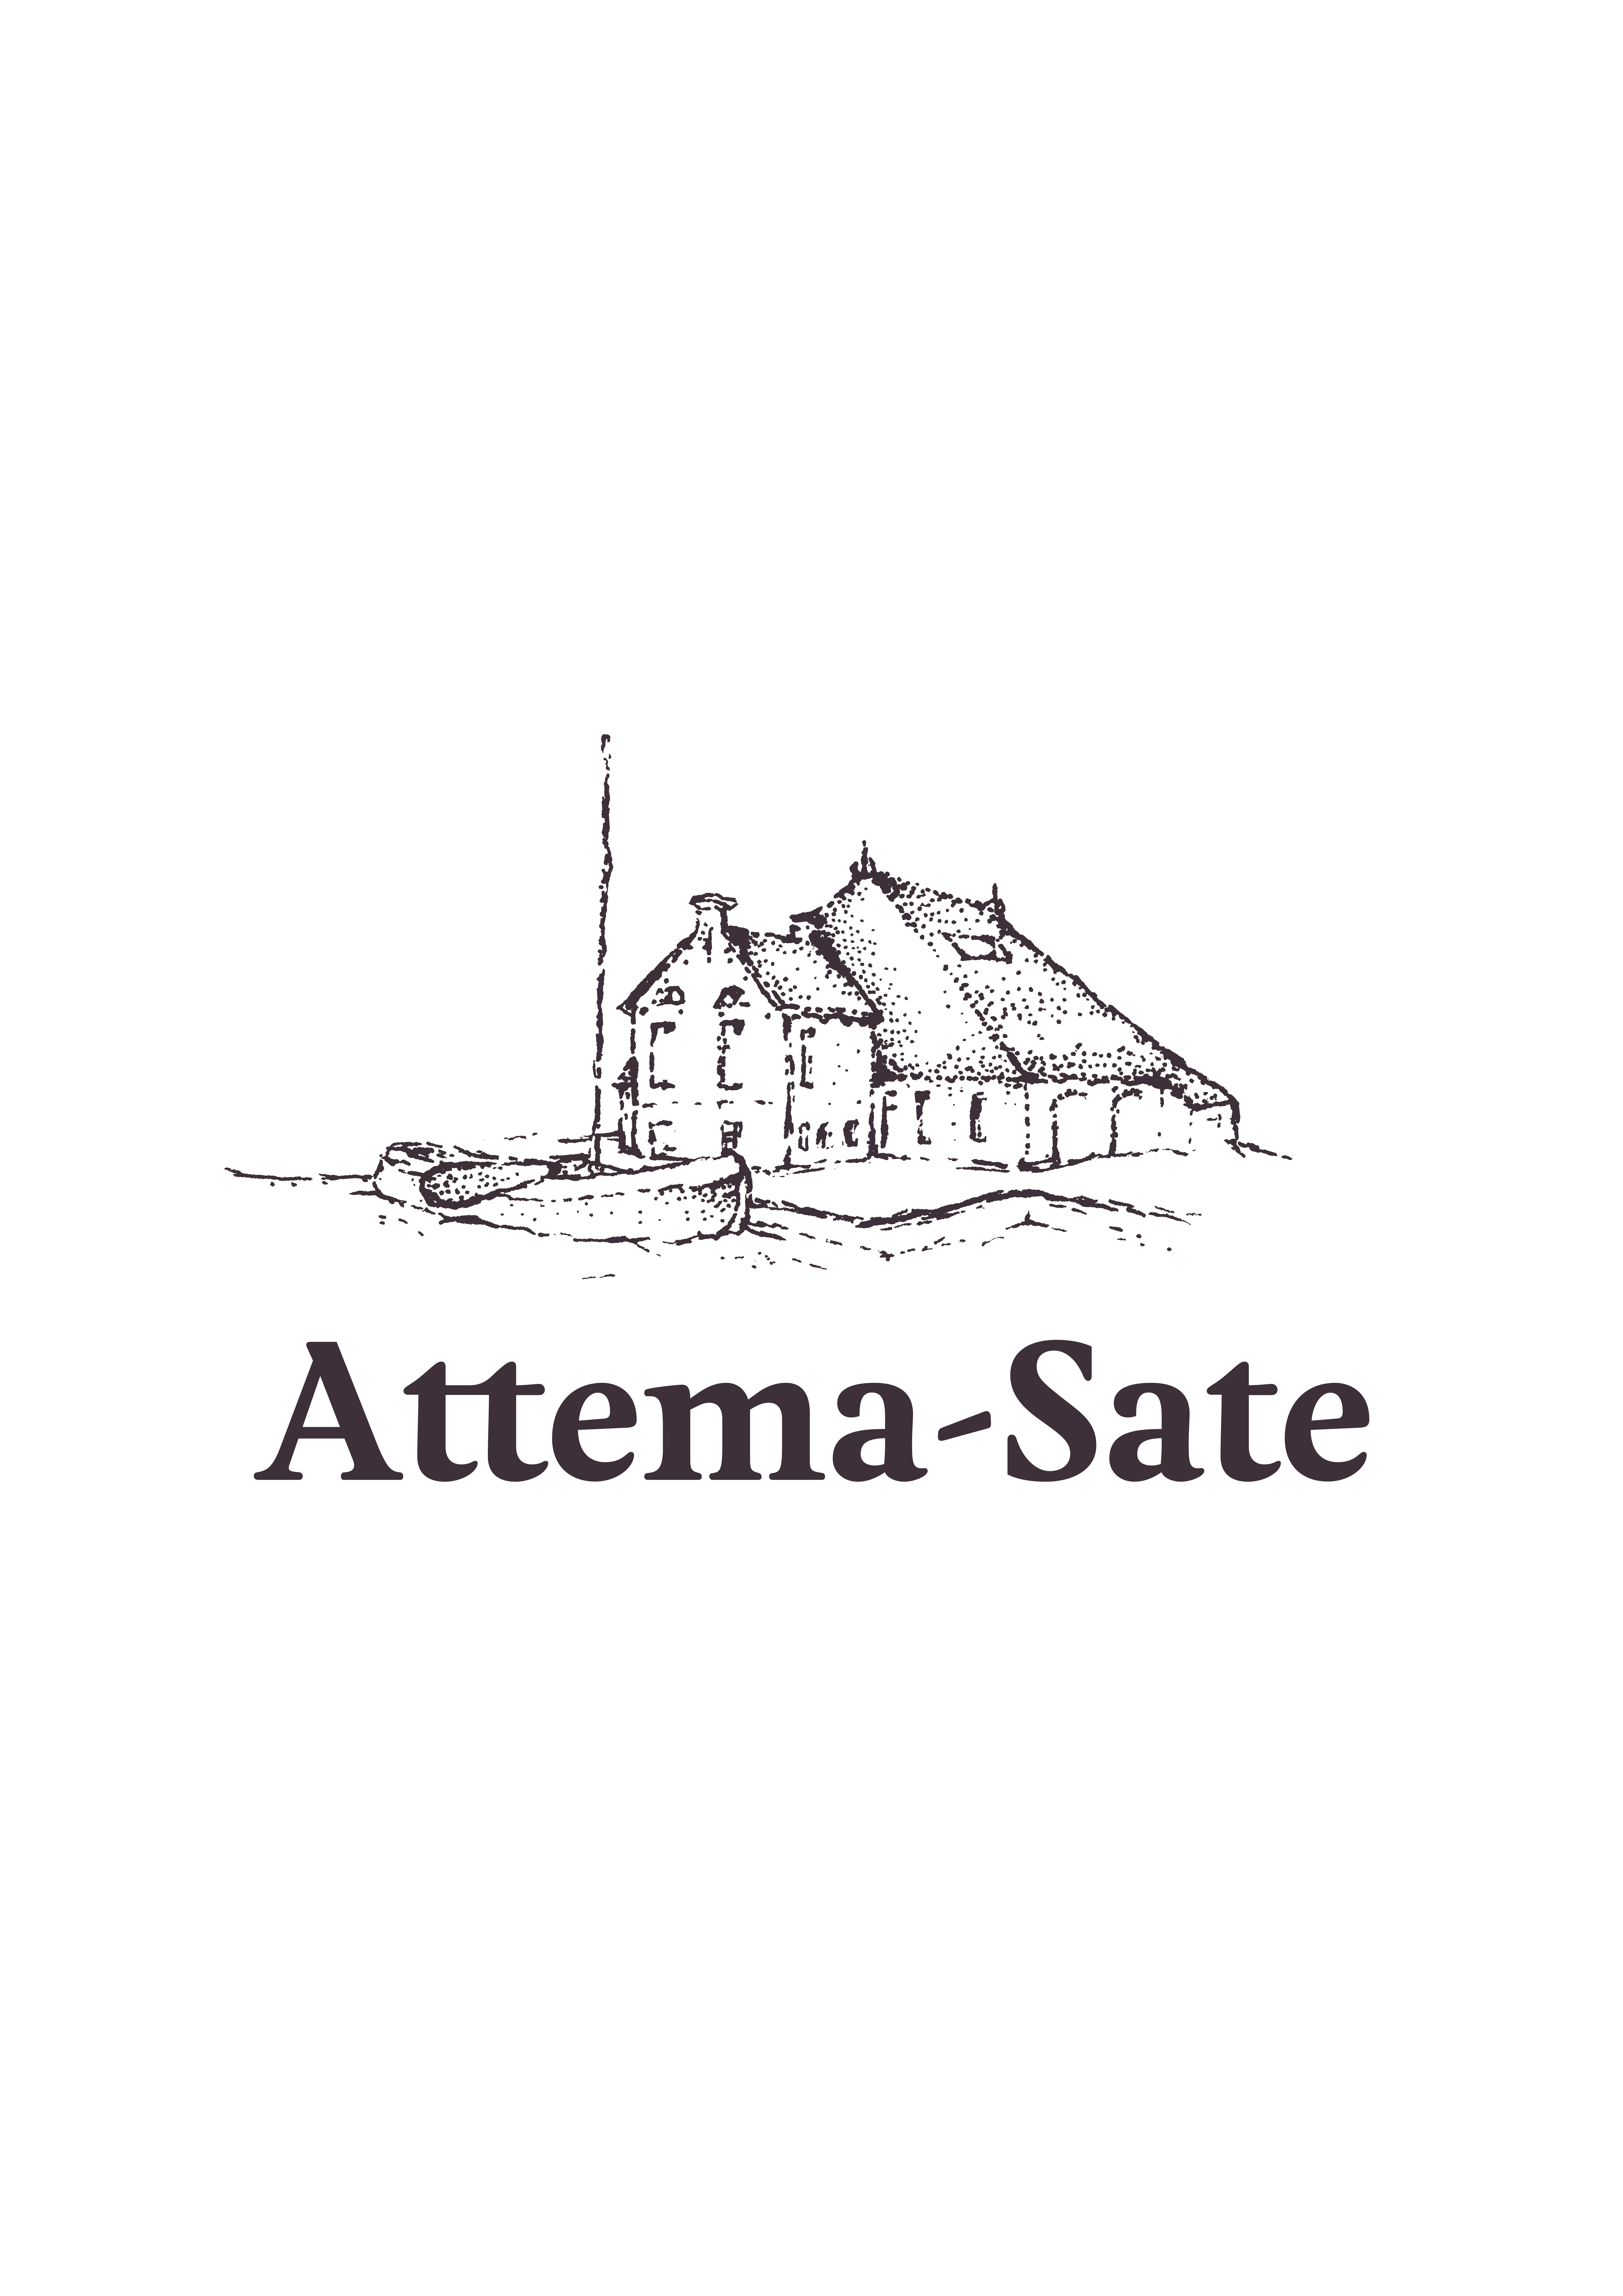 Attema-Sate